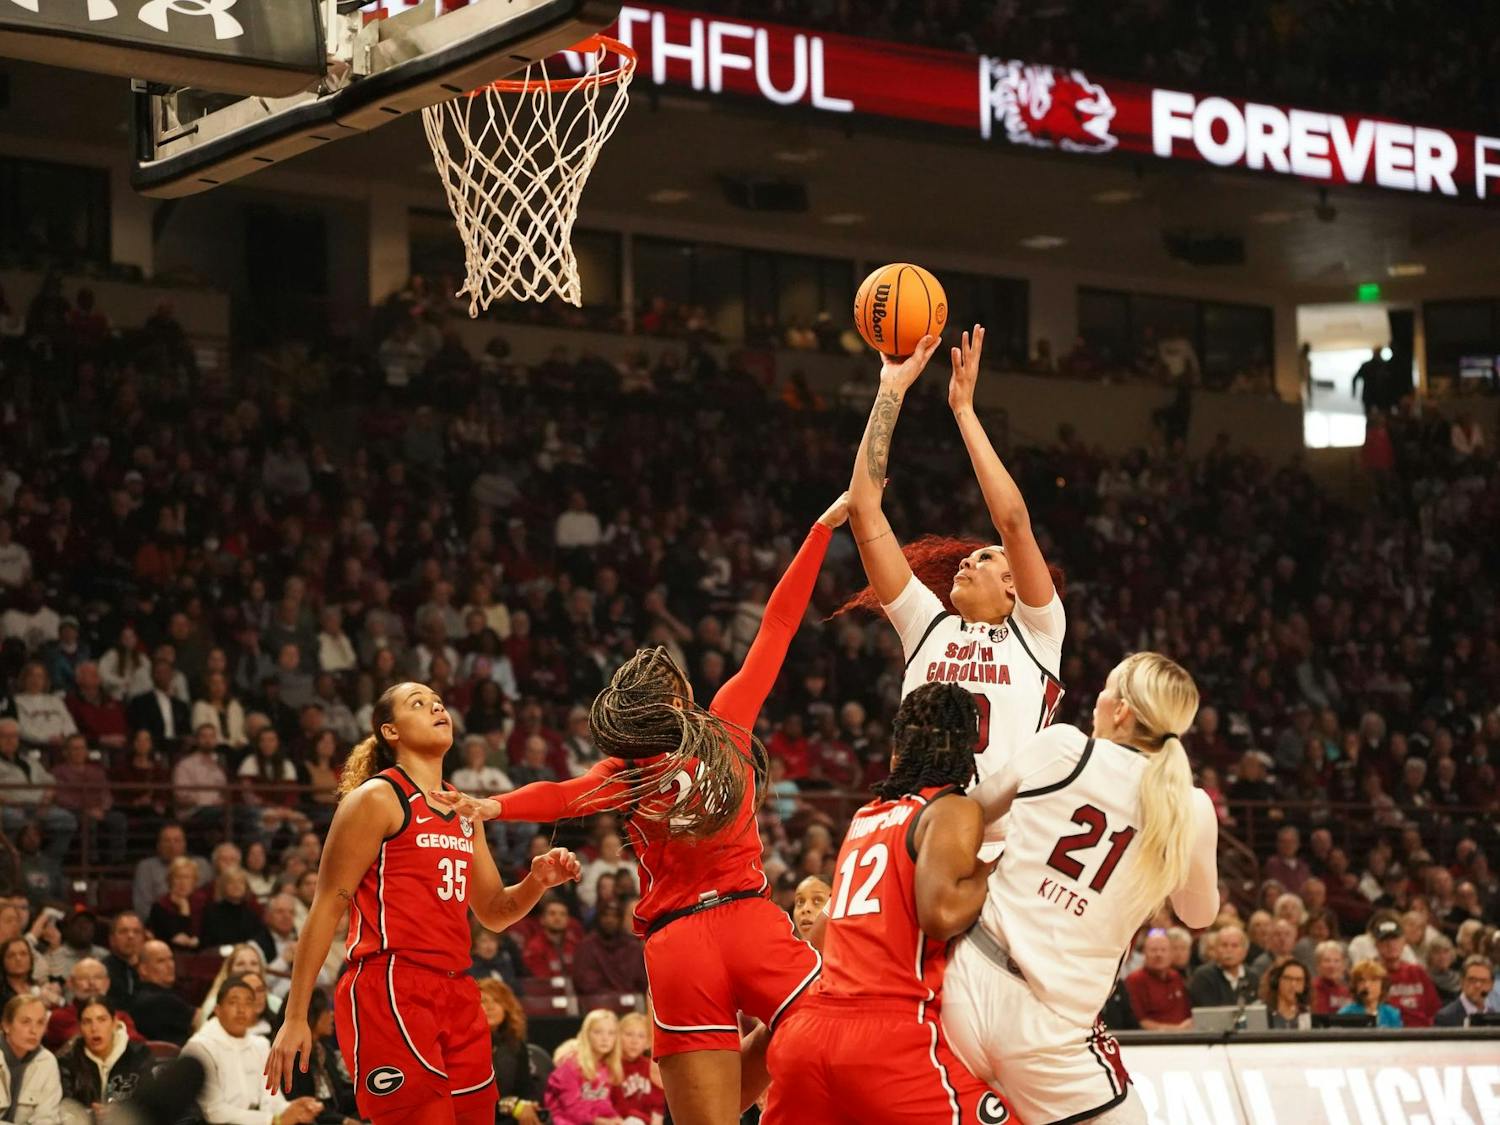 The South Carolina women's basketball team advances to 25-0 after defeating the Georgia Bulldogs 70-56 at home on Feb. 18, 2024. ESPN College GameDay was at Colonial Life Arena and interviewed head coach Dawn Staley before tip-off. The victory marks the Gamecocks' 43rd consecutive SEC win and inches Staley closer to 600 wins as a head coach.